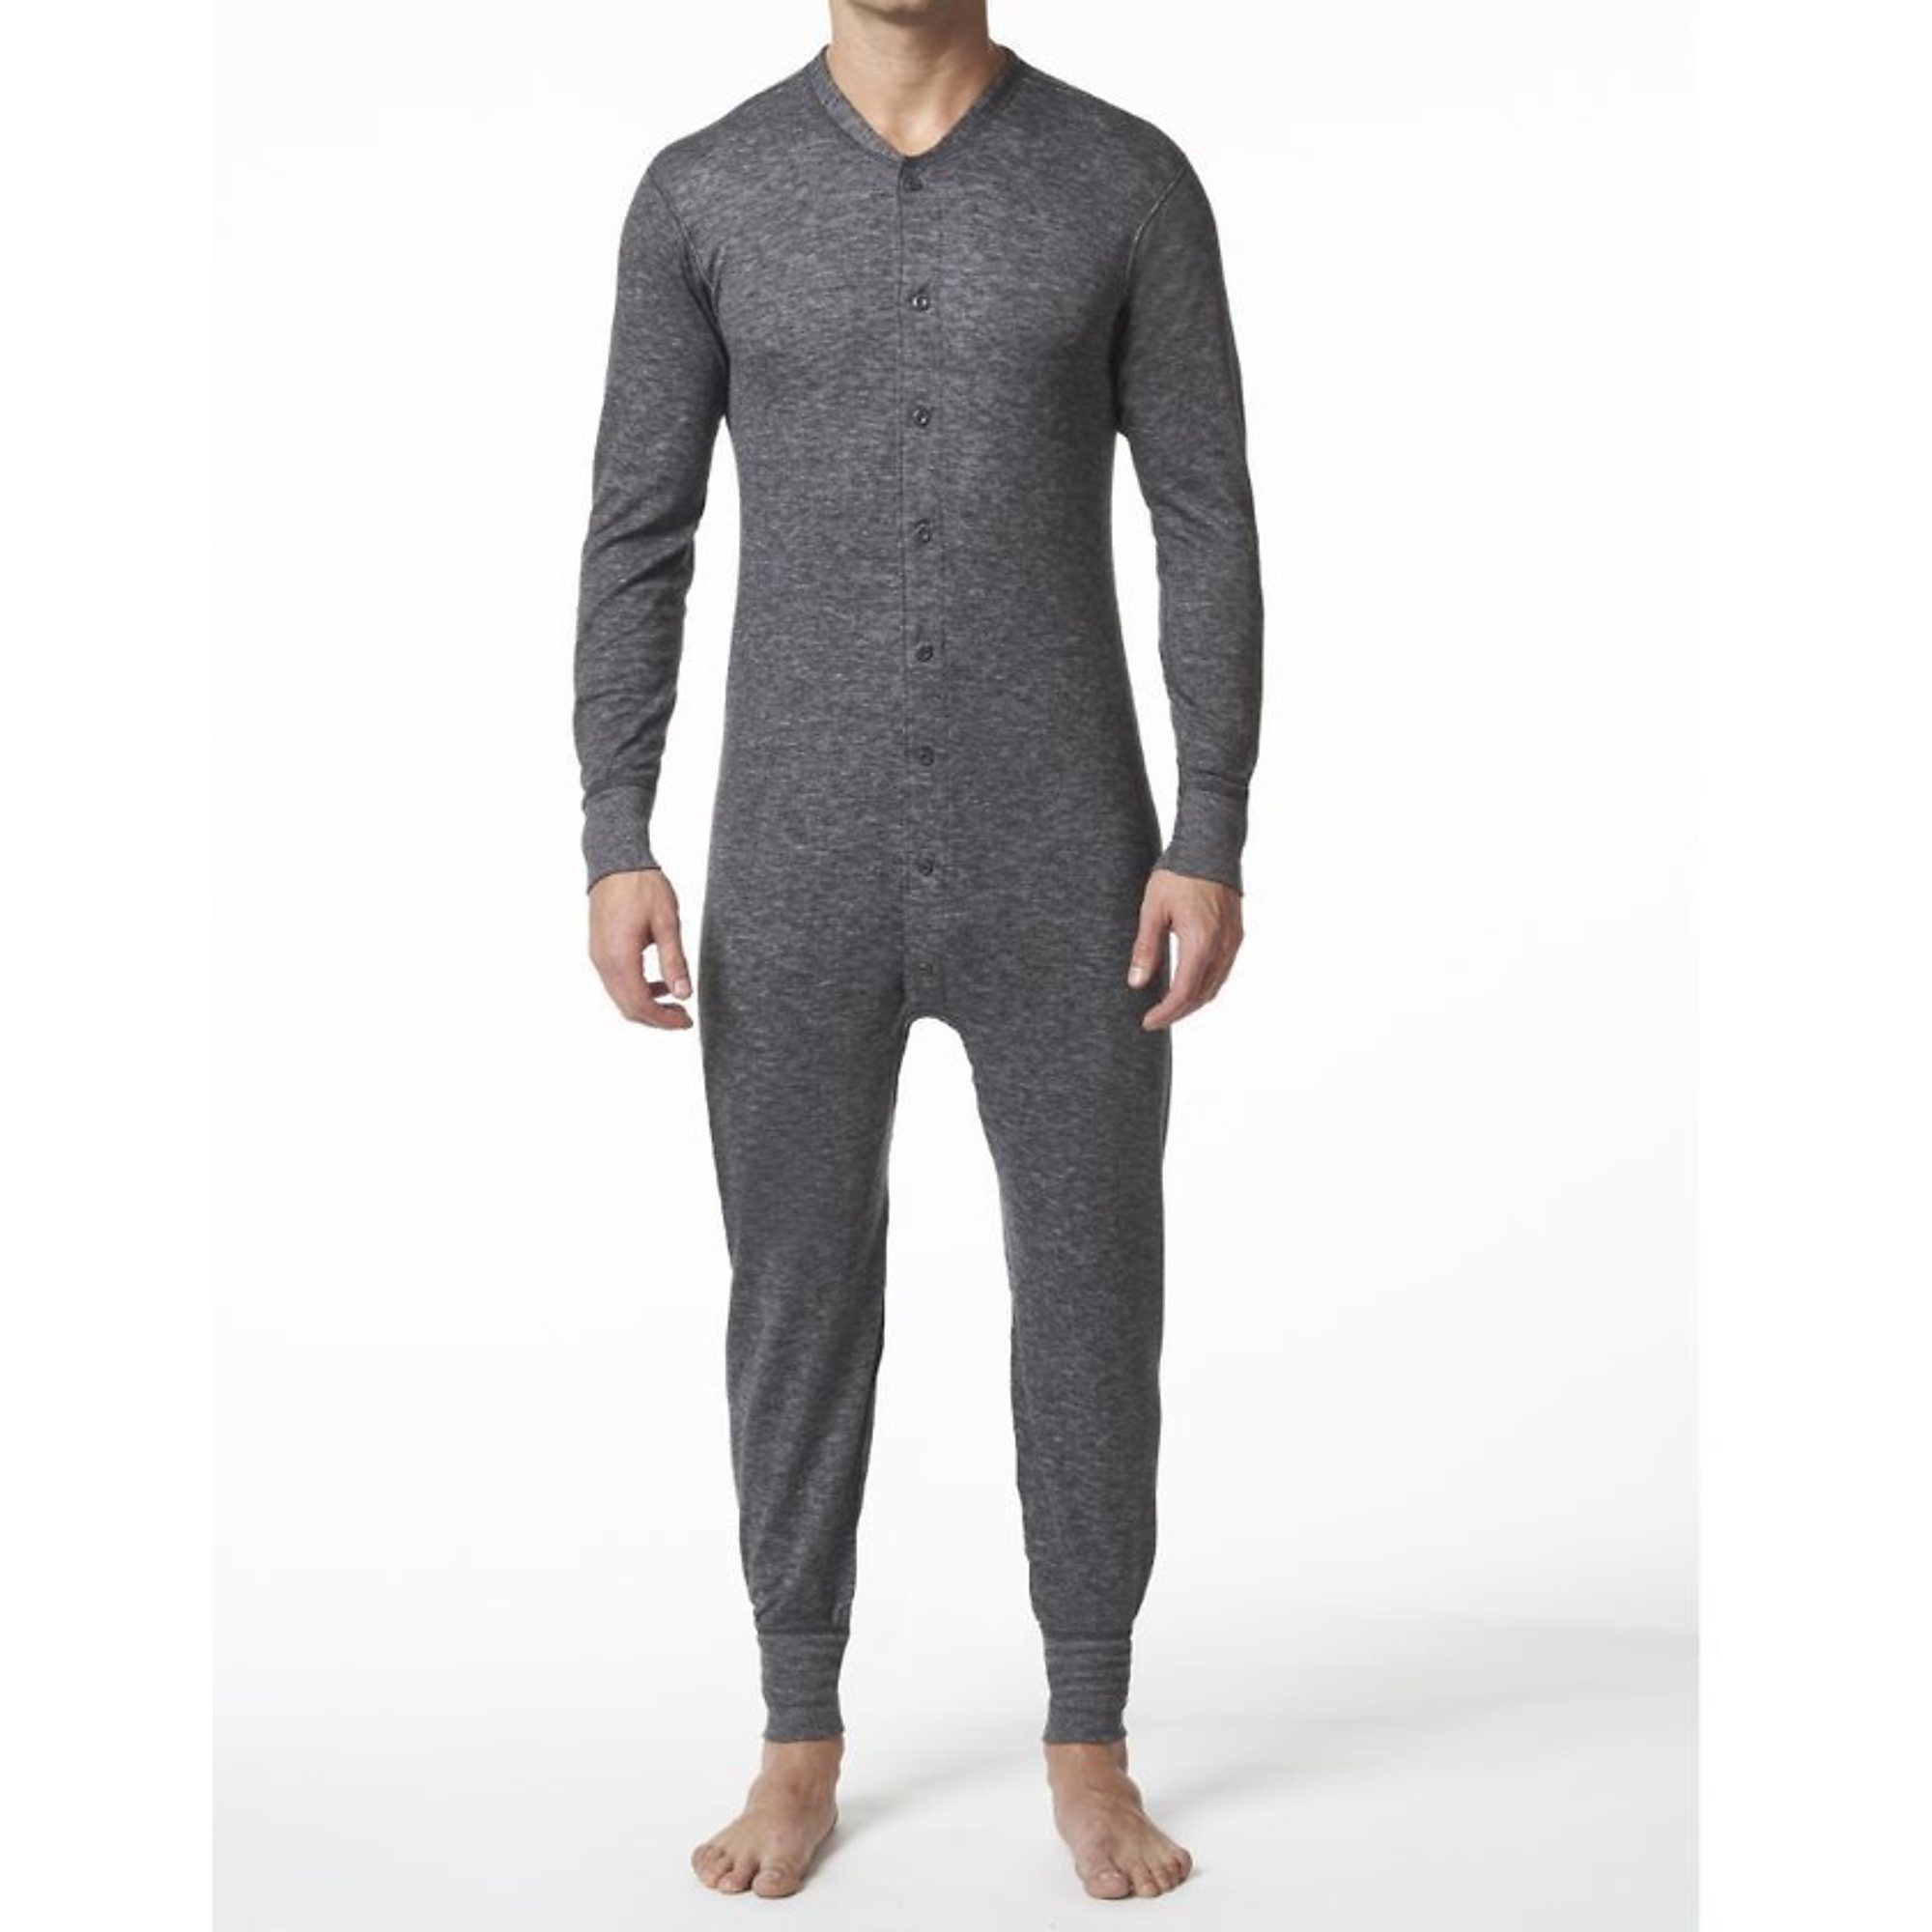 Men's Wool Blend Long Sleeve Base Layer (Two-Layer)